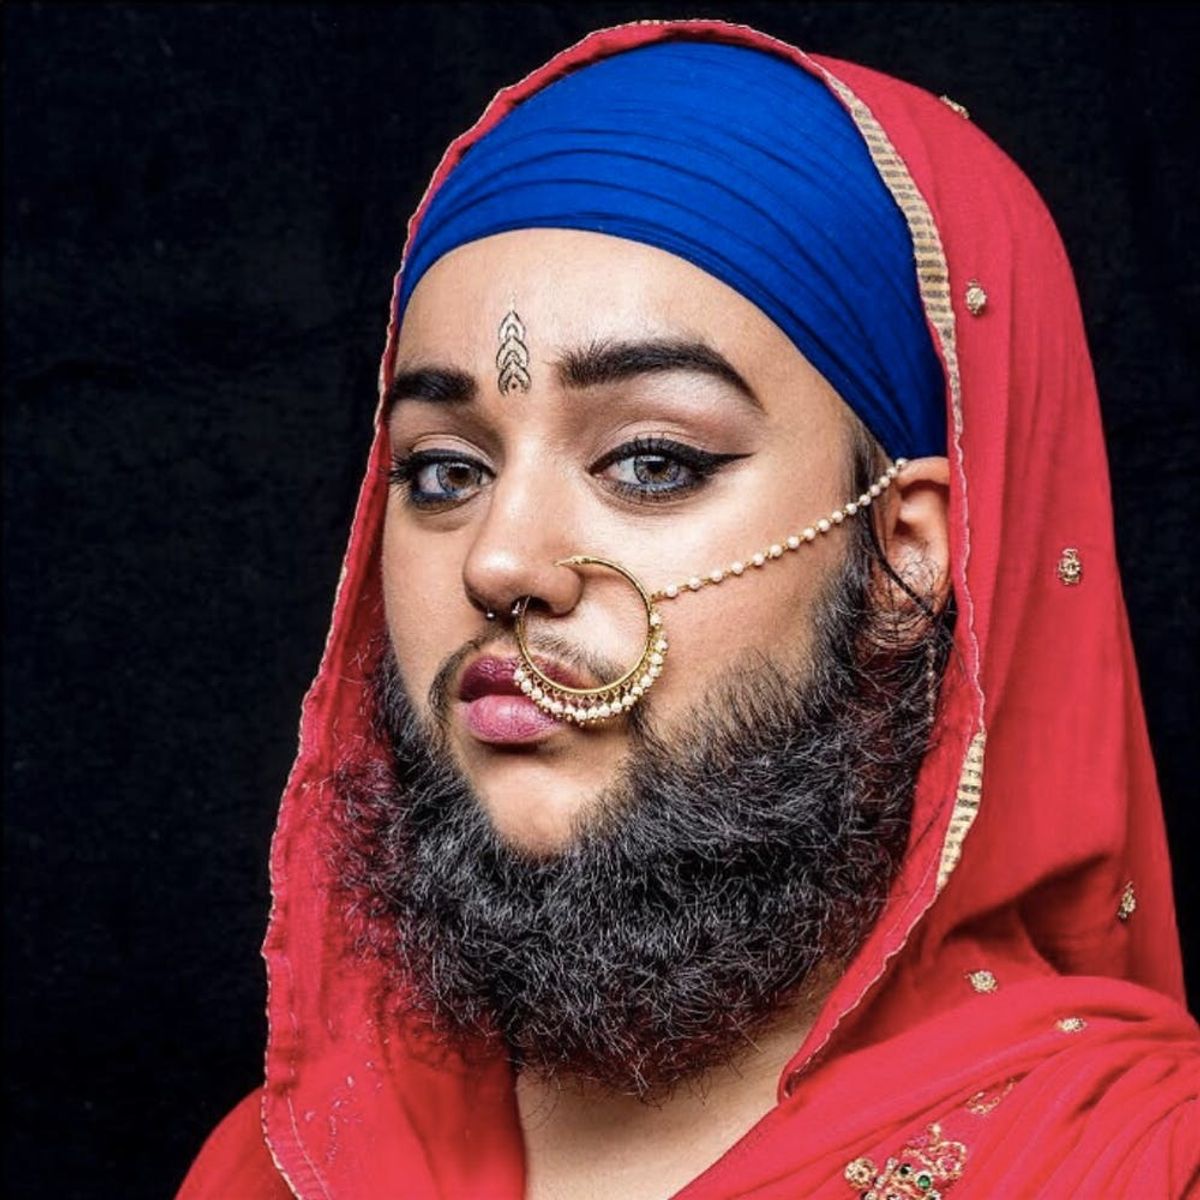 This Female Model With a Full Beard Has Become an Unexpected Beauty Guru